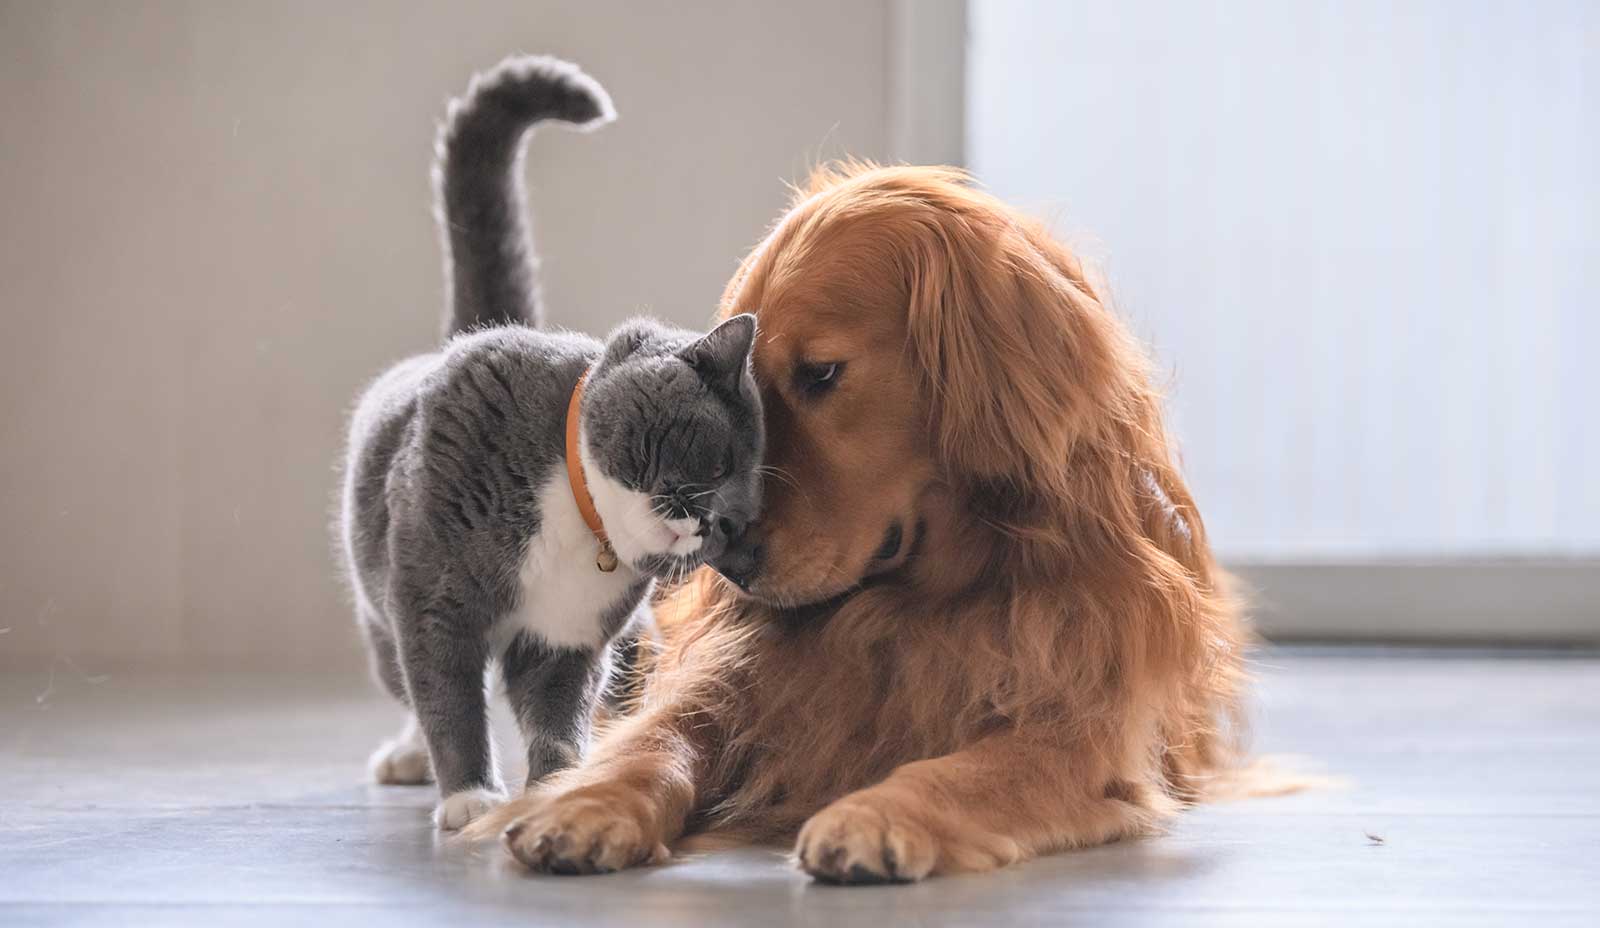 A dog and cat snuggling